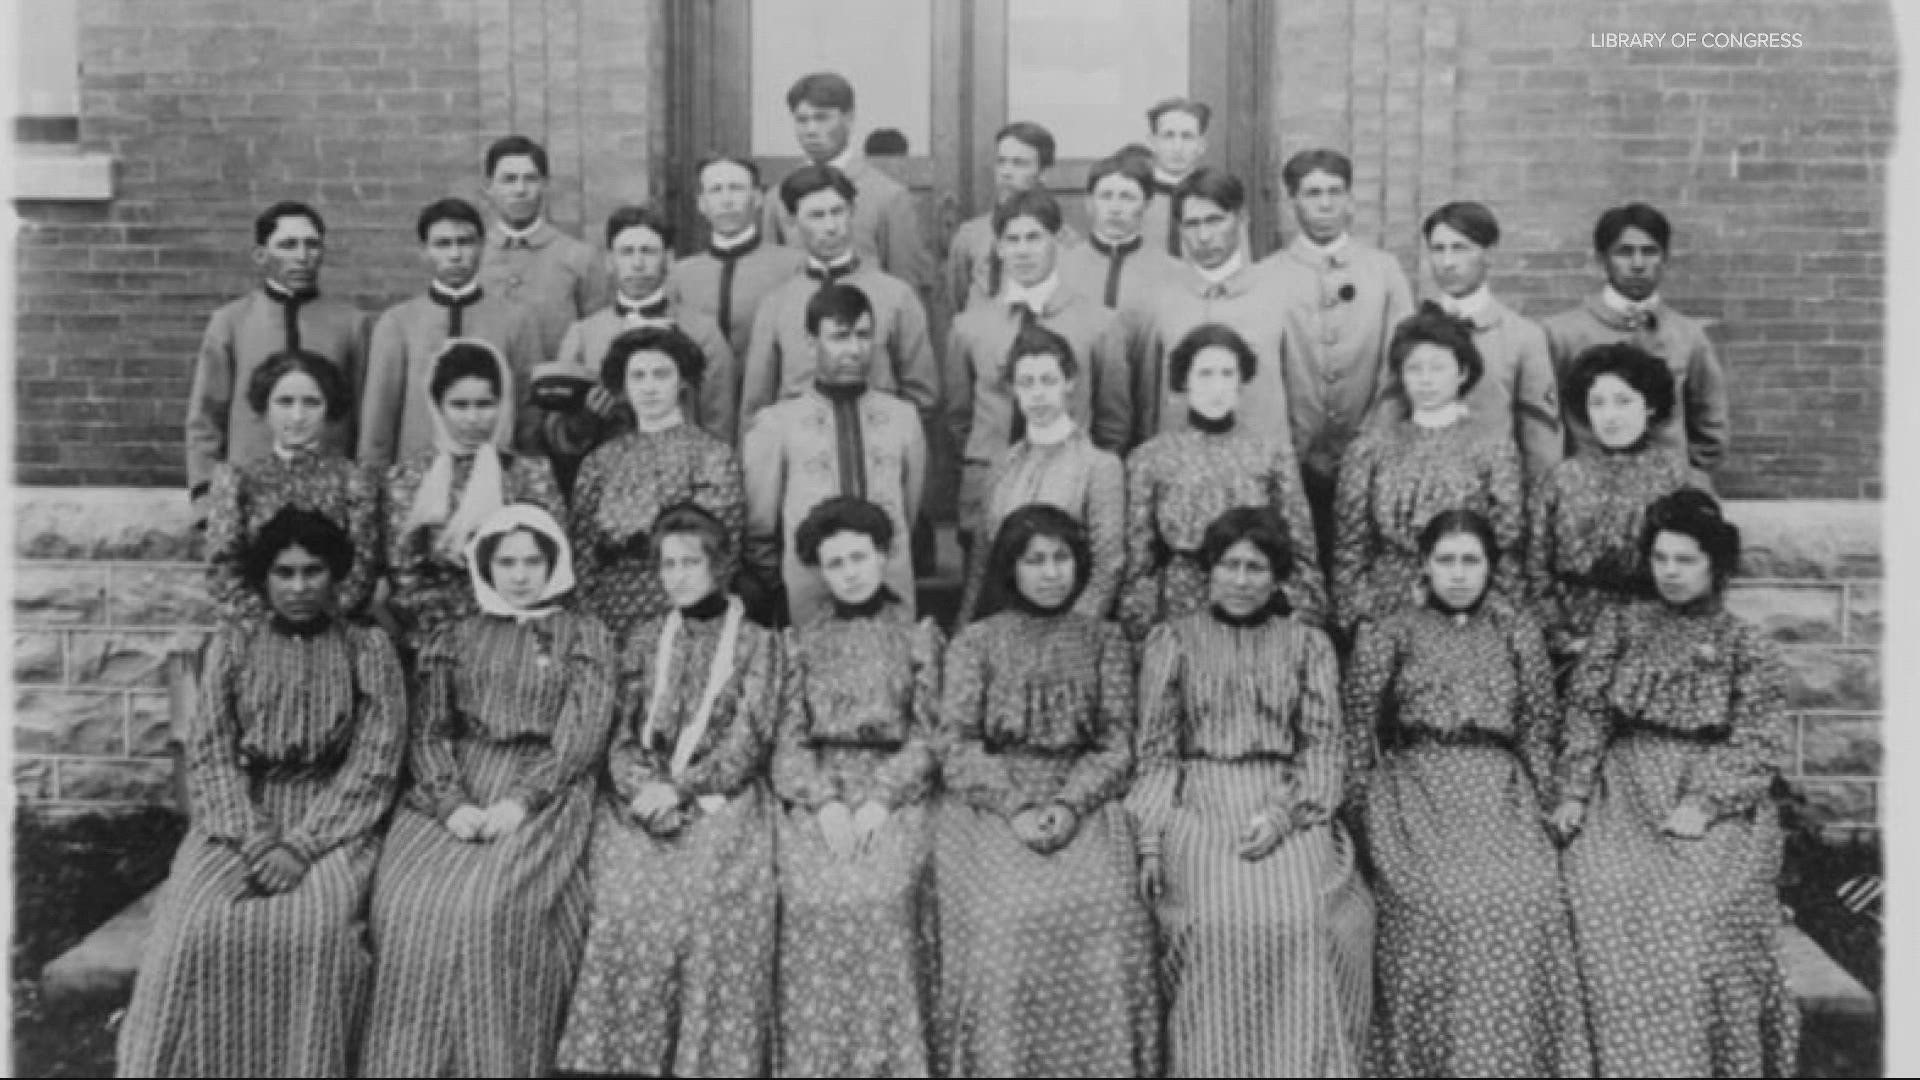 Thousands of indigenous children were taken from their communities and forced into boarding schools run by the U.S. government.